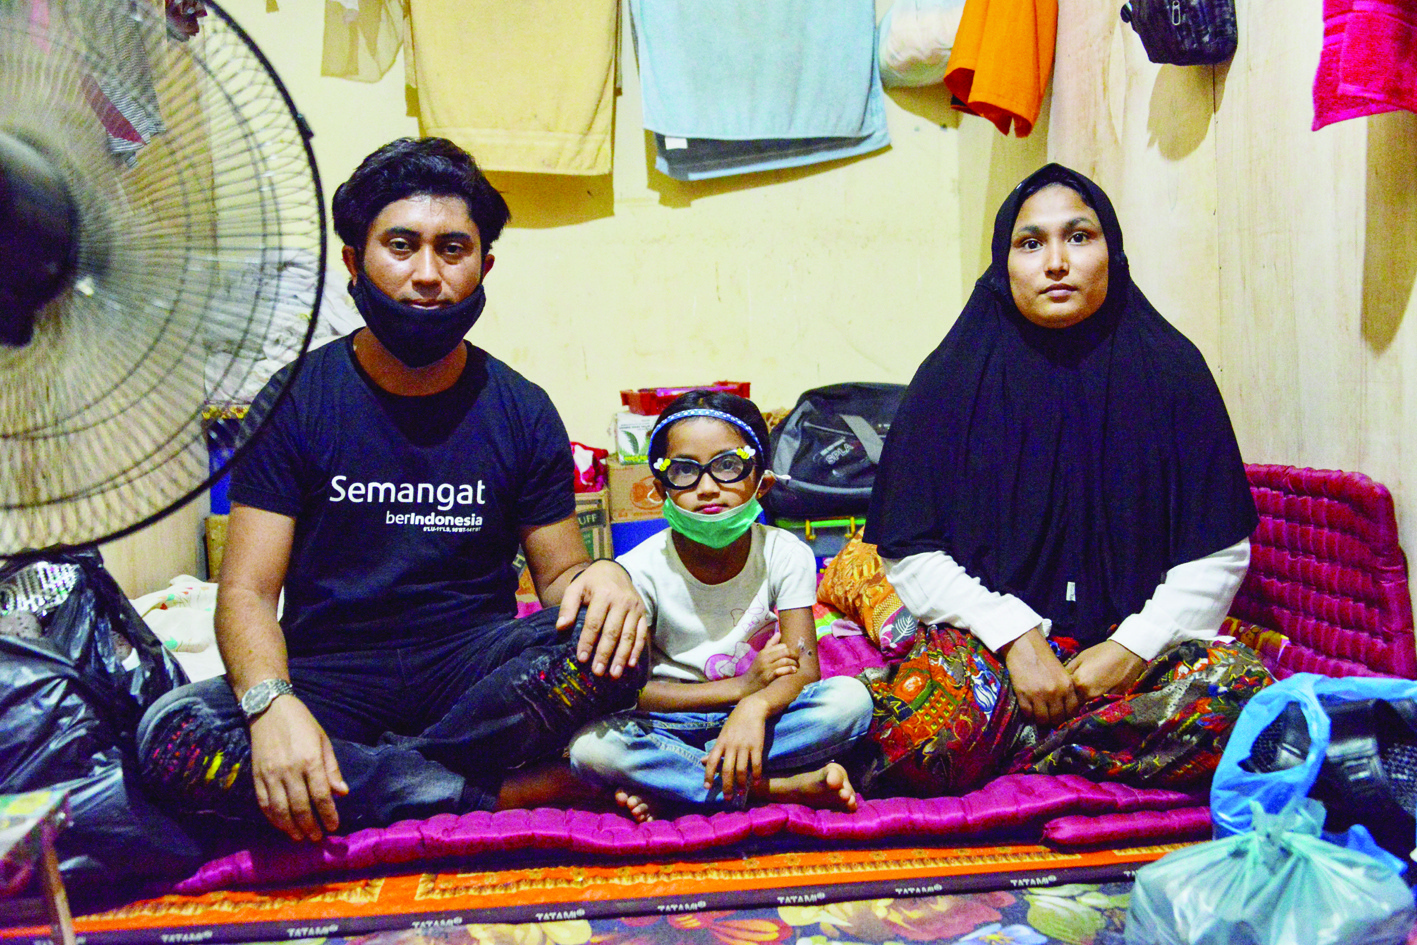 This photo taken on October 22, 2020 shows Rohingya migrant Nemah Shah (L) with his six-year-old daughter Nosmin Fatimah and his wife Majuma (R) after being reunited at a temporary shelter in Lhokseumawe in Aceh province. - Weeks after a funeral for the wife and daughter he thought had died at sea while trying to sail to him, Nemah Shah was stunned when he saw online images of them emerging from a refugee boat in Indonesia. (Photo by CHAIDEER MAHYUDDIN / AFP) / To go with Rohingya-migration-trafficking-family,FOCUS by Haeril Halim